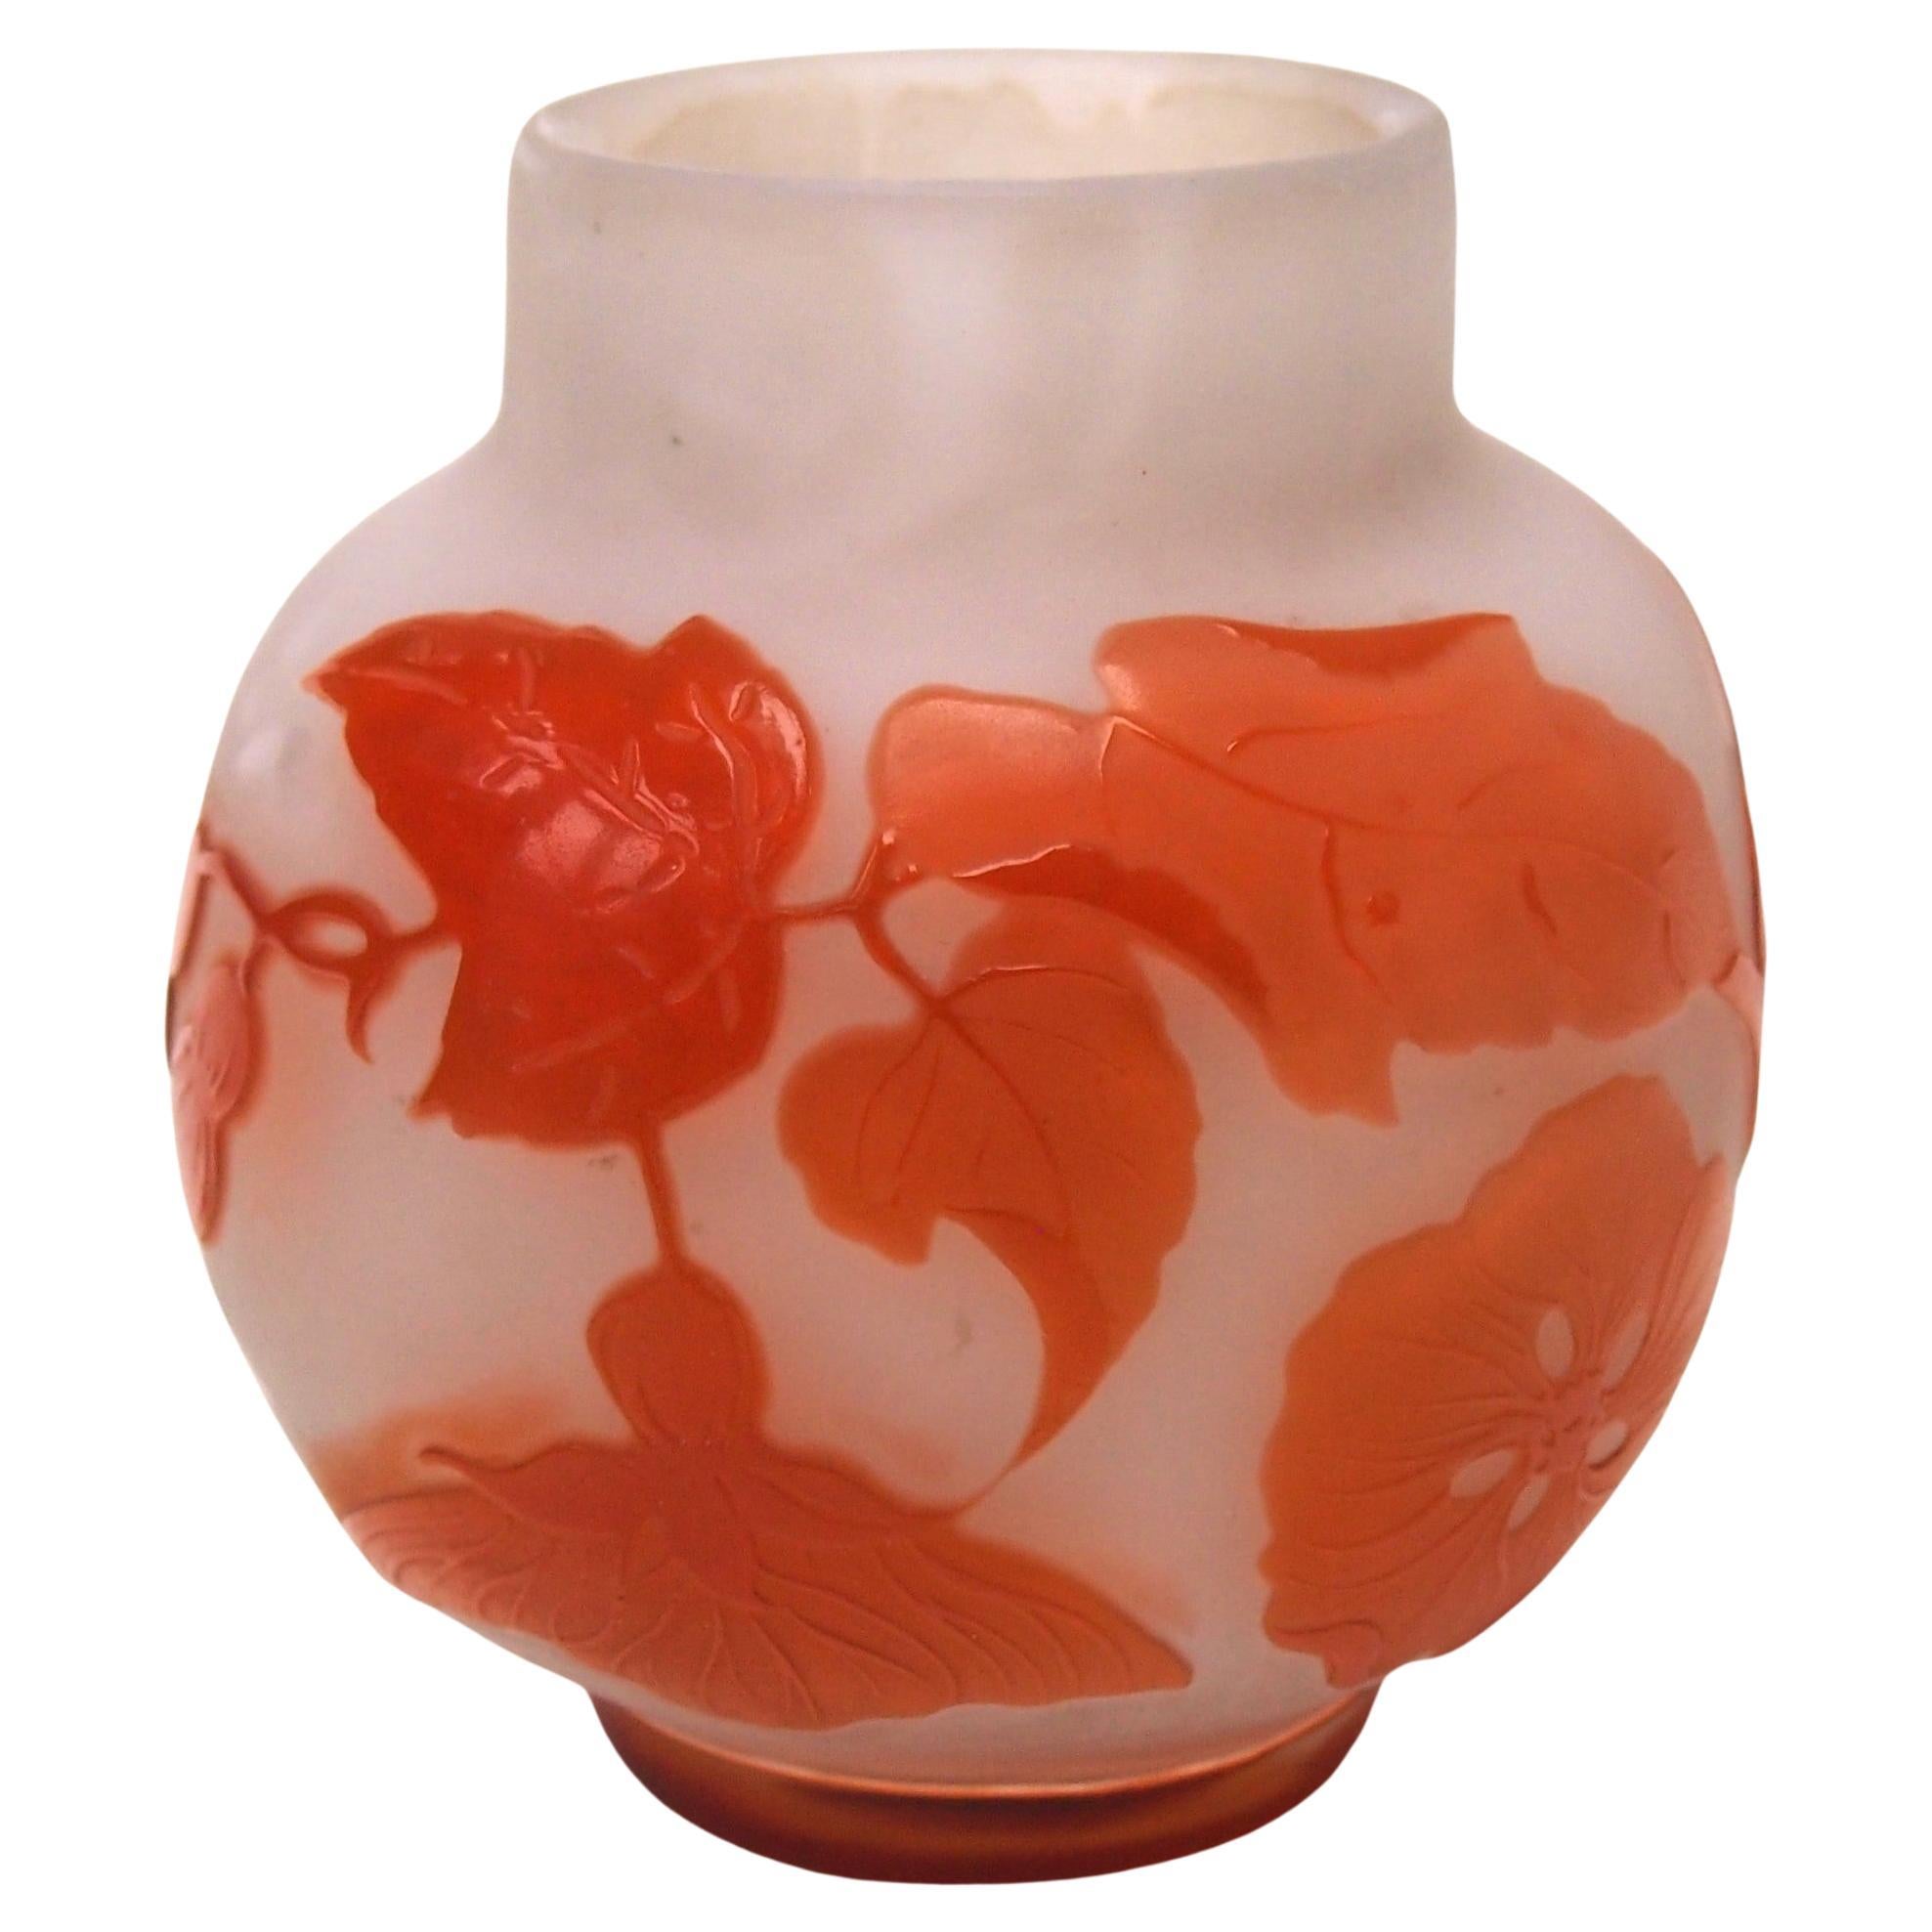 Striking Early French Art Nouveau Emile Galle Botanical Cameo Glass Vase -c1900 For Sale